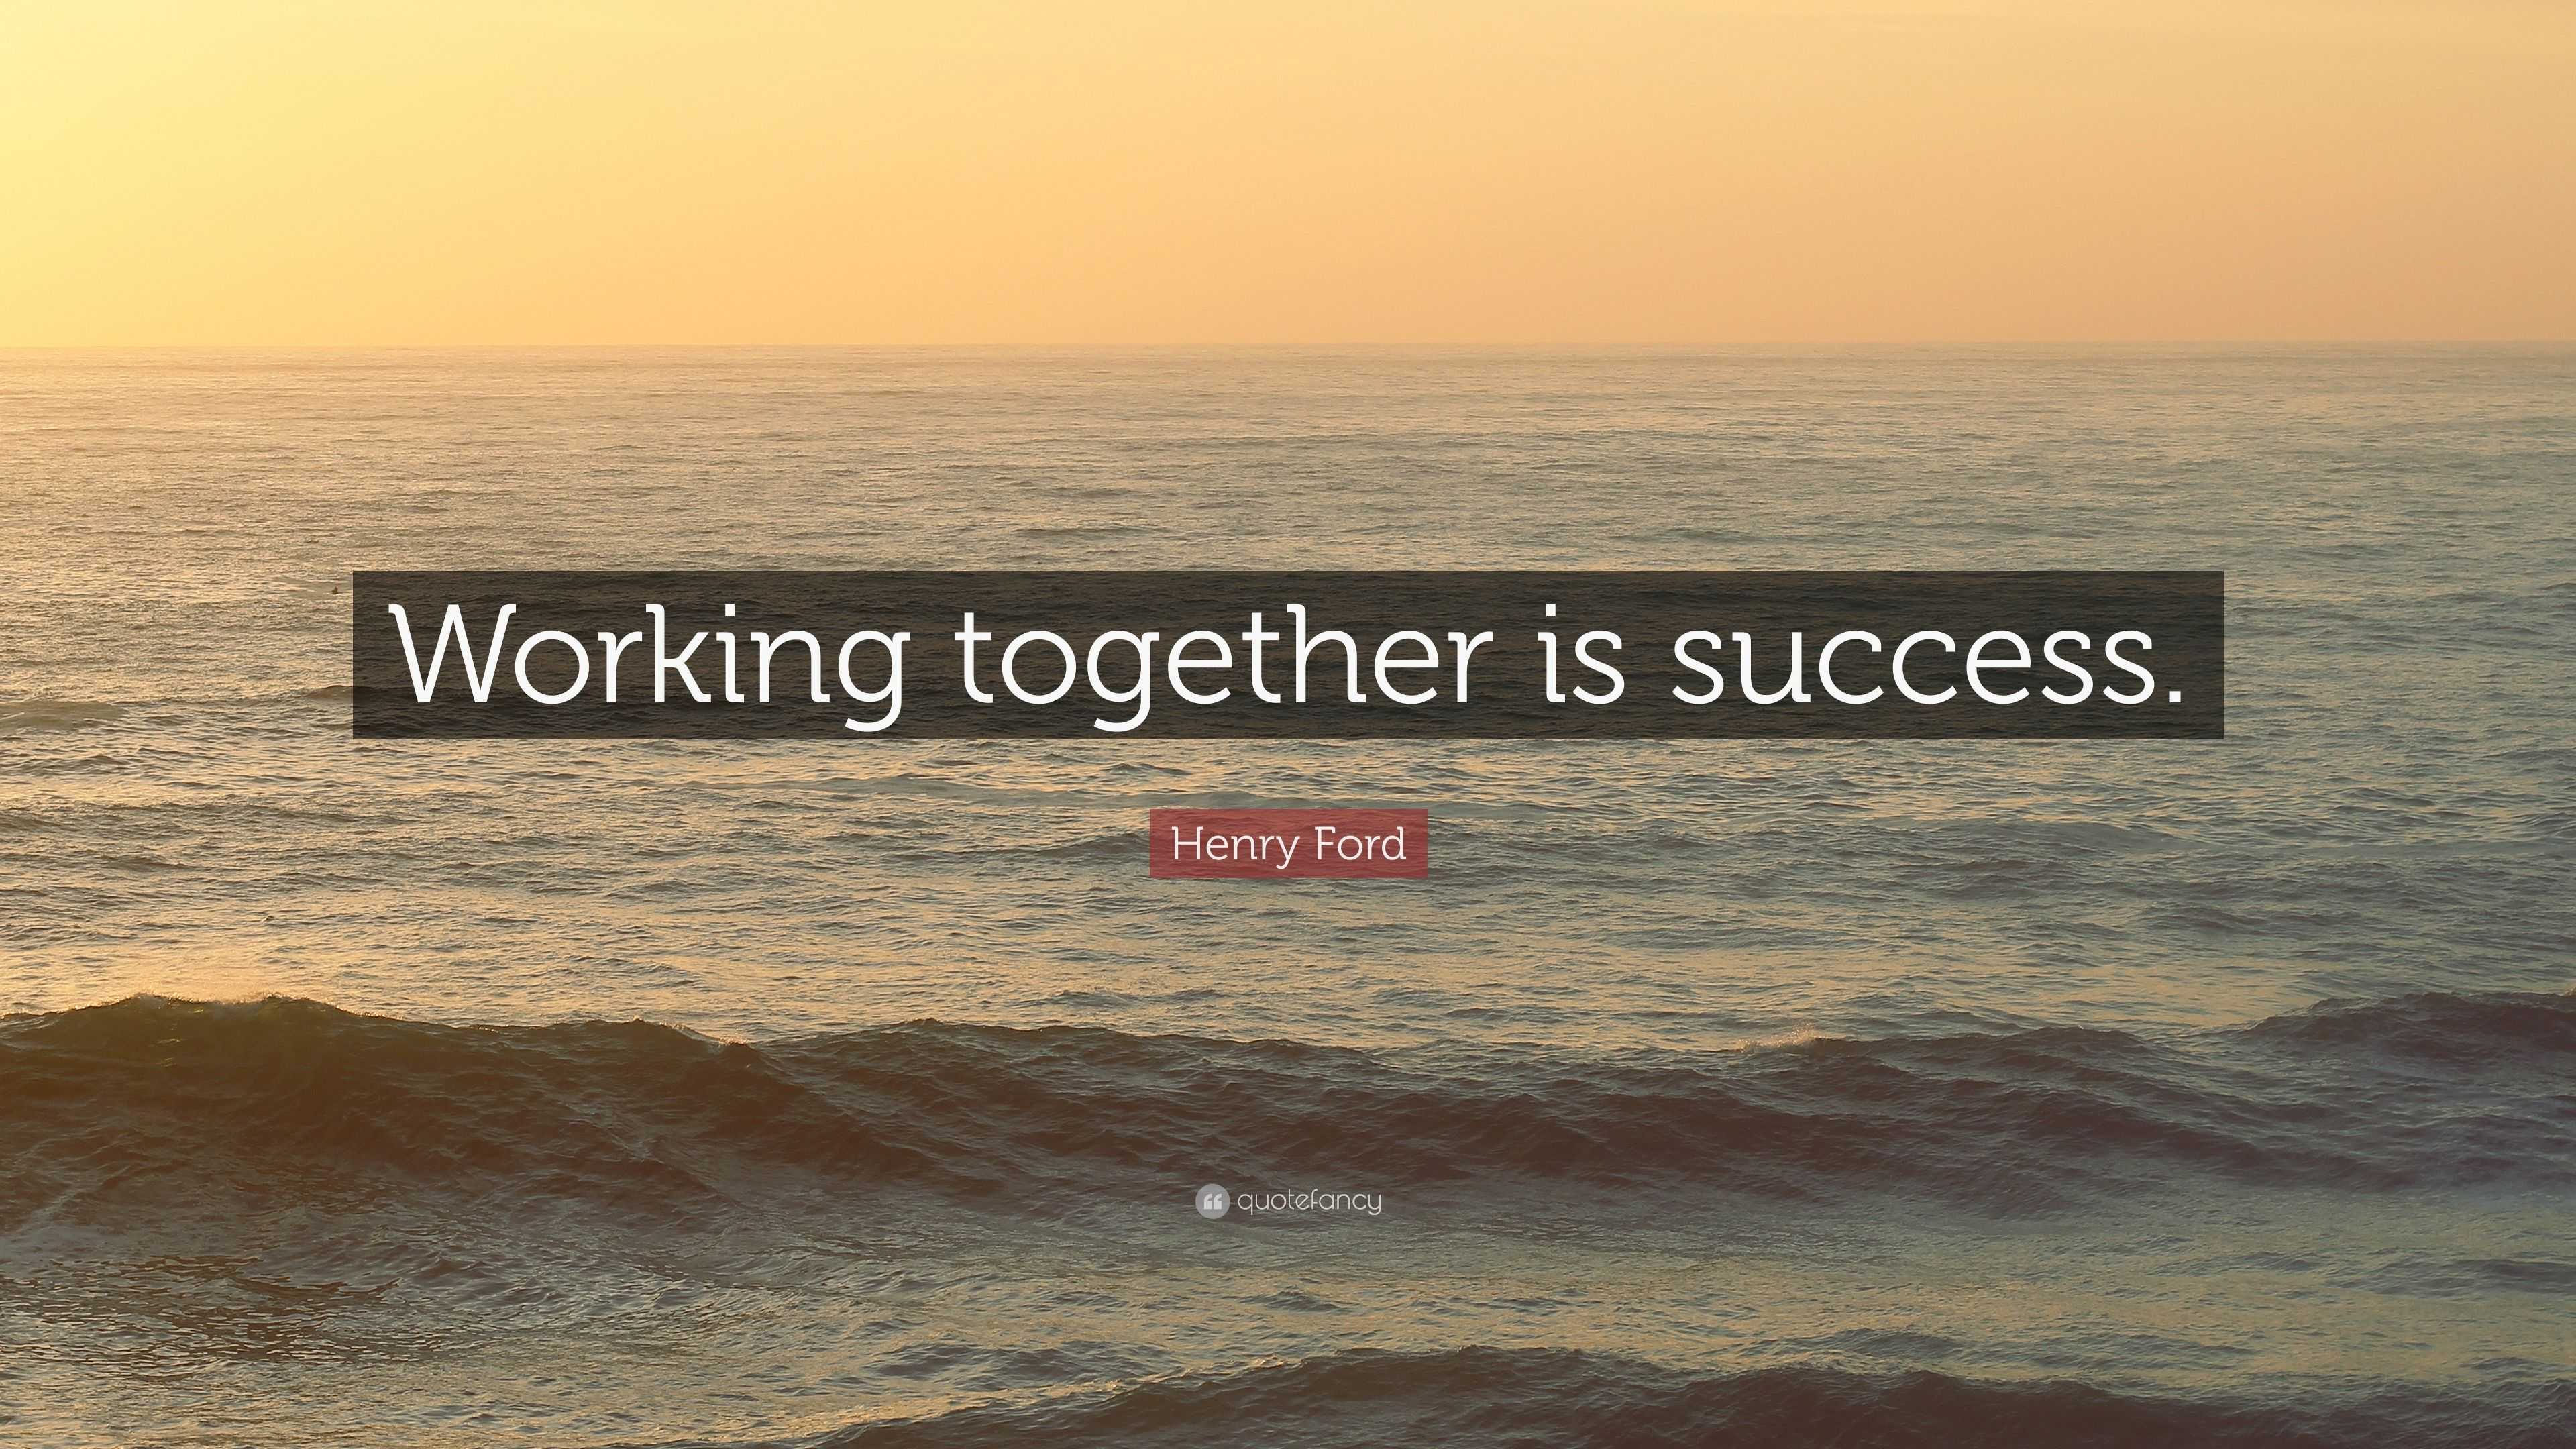 Henry Ford Quote: “Working together is success.”